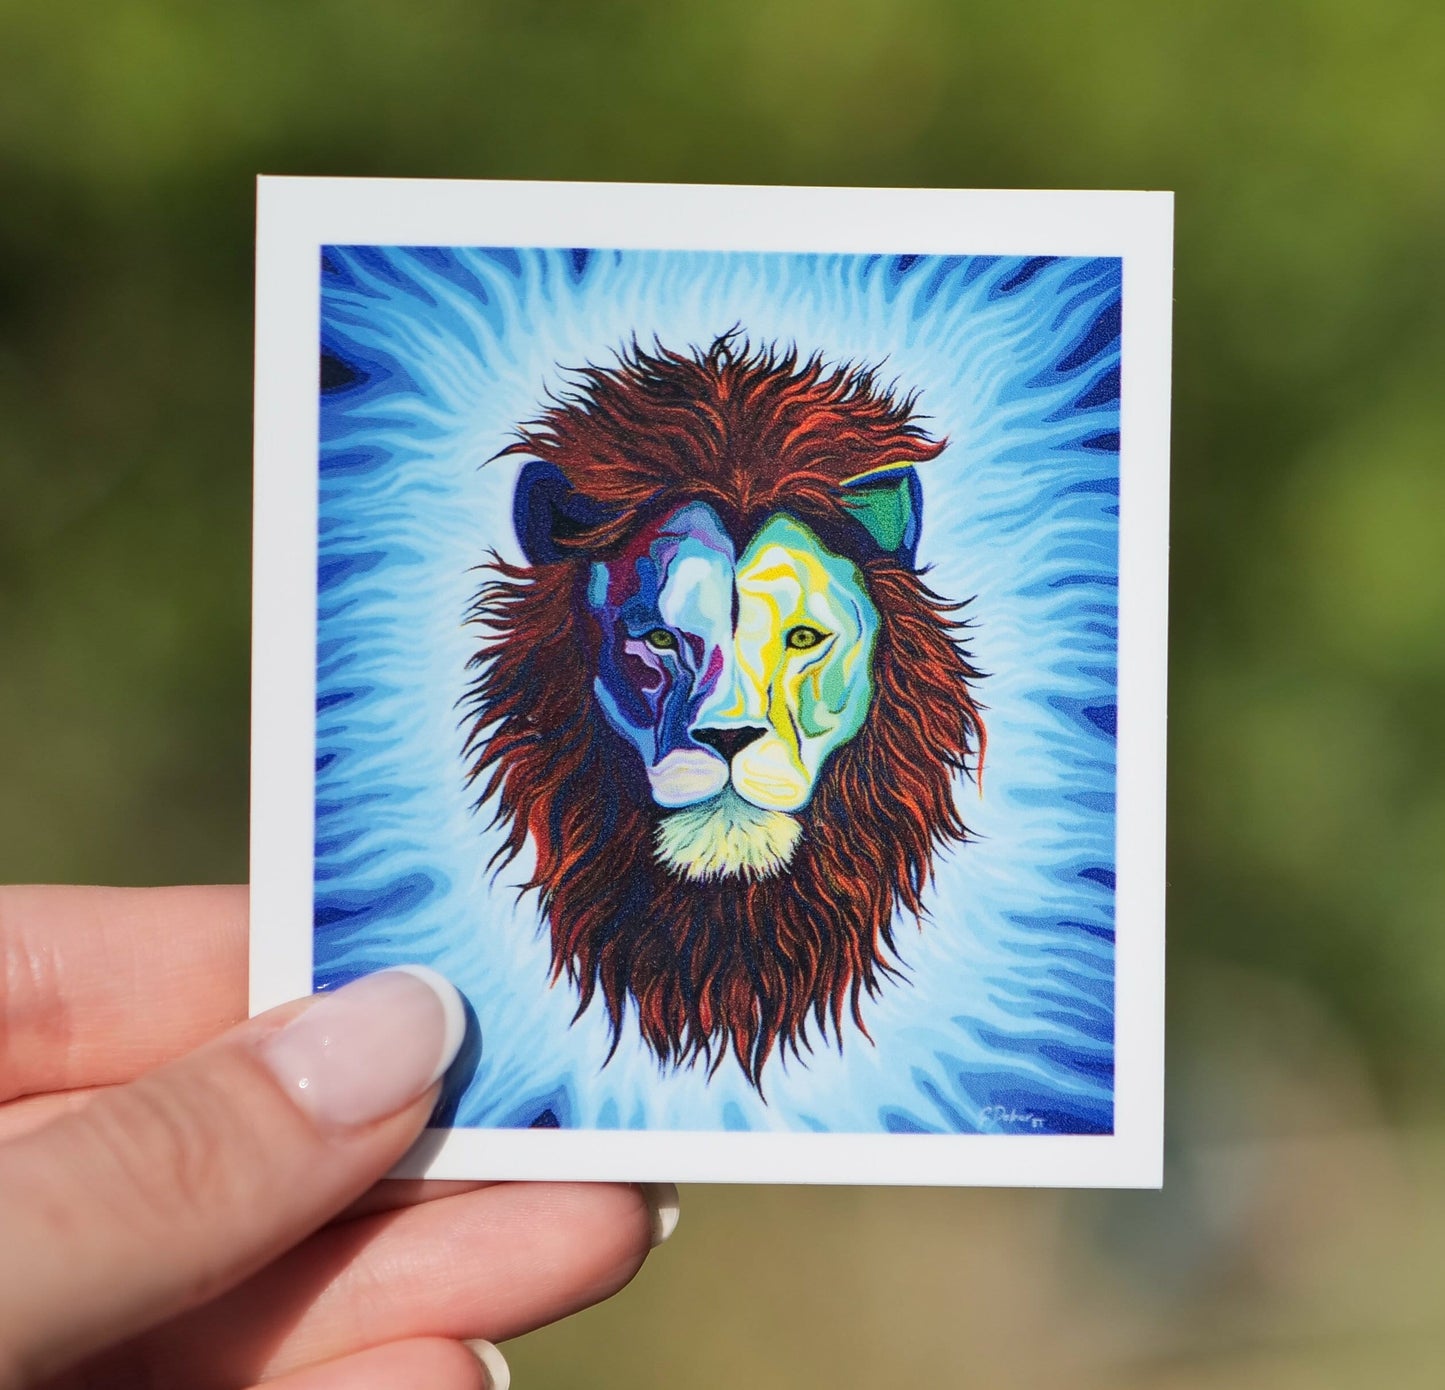 Spirit of a Lion - Vinyl Quote Sticker | Spirit Animal | Leo | Courage | Abstract painting